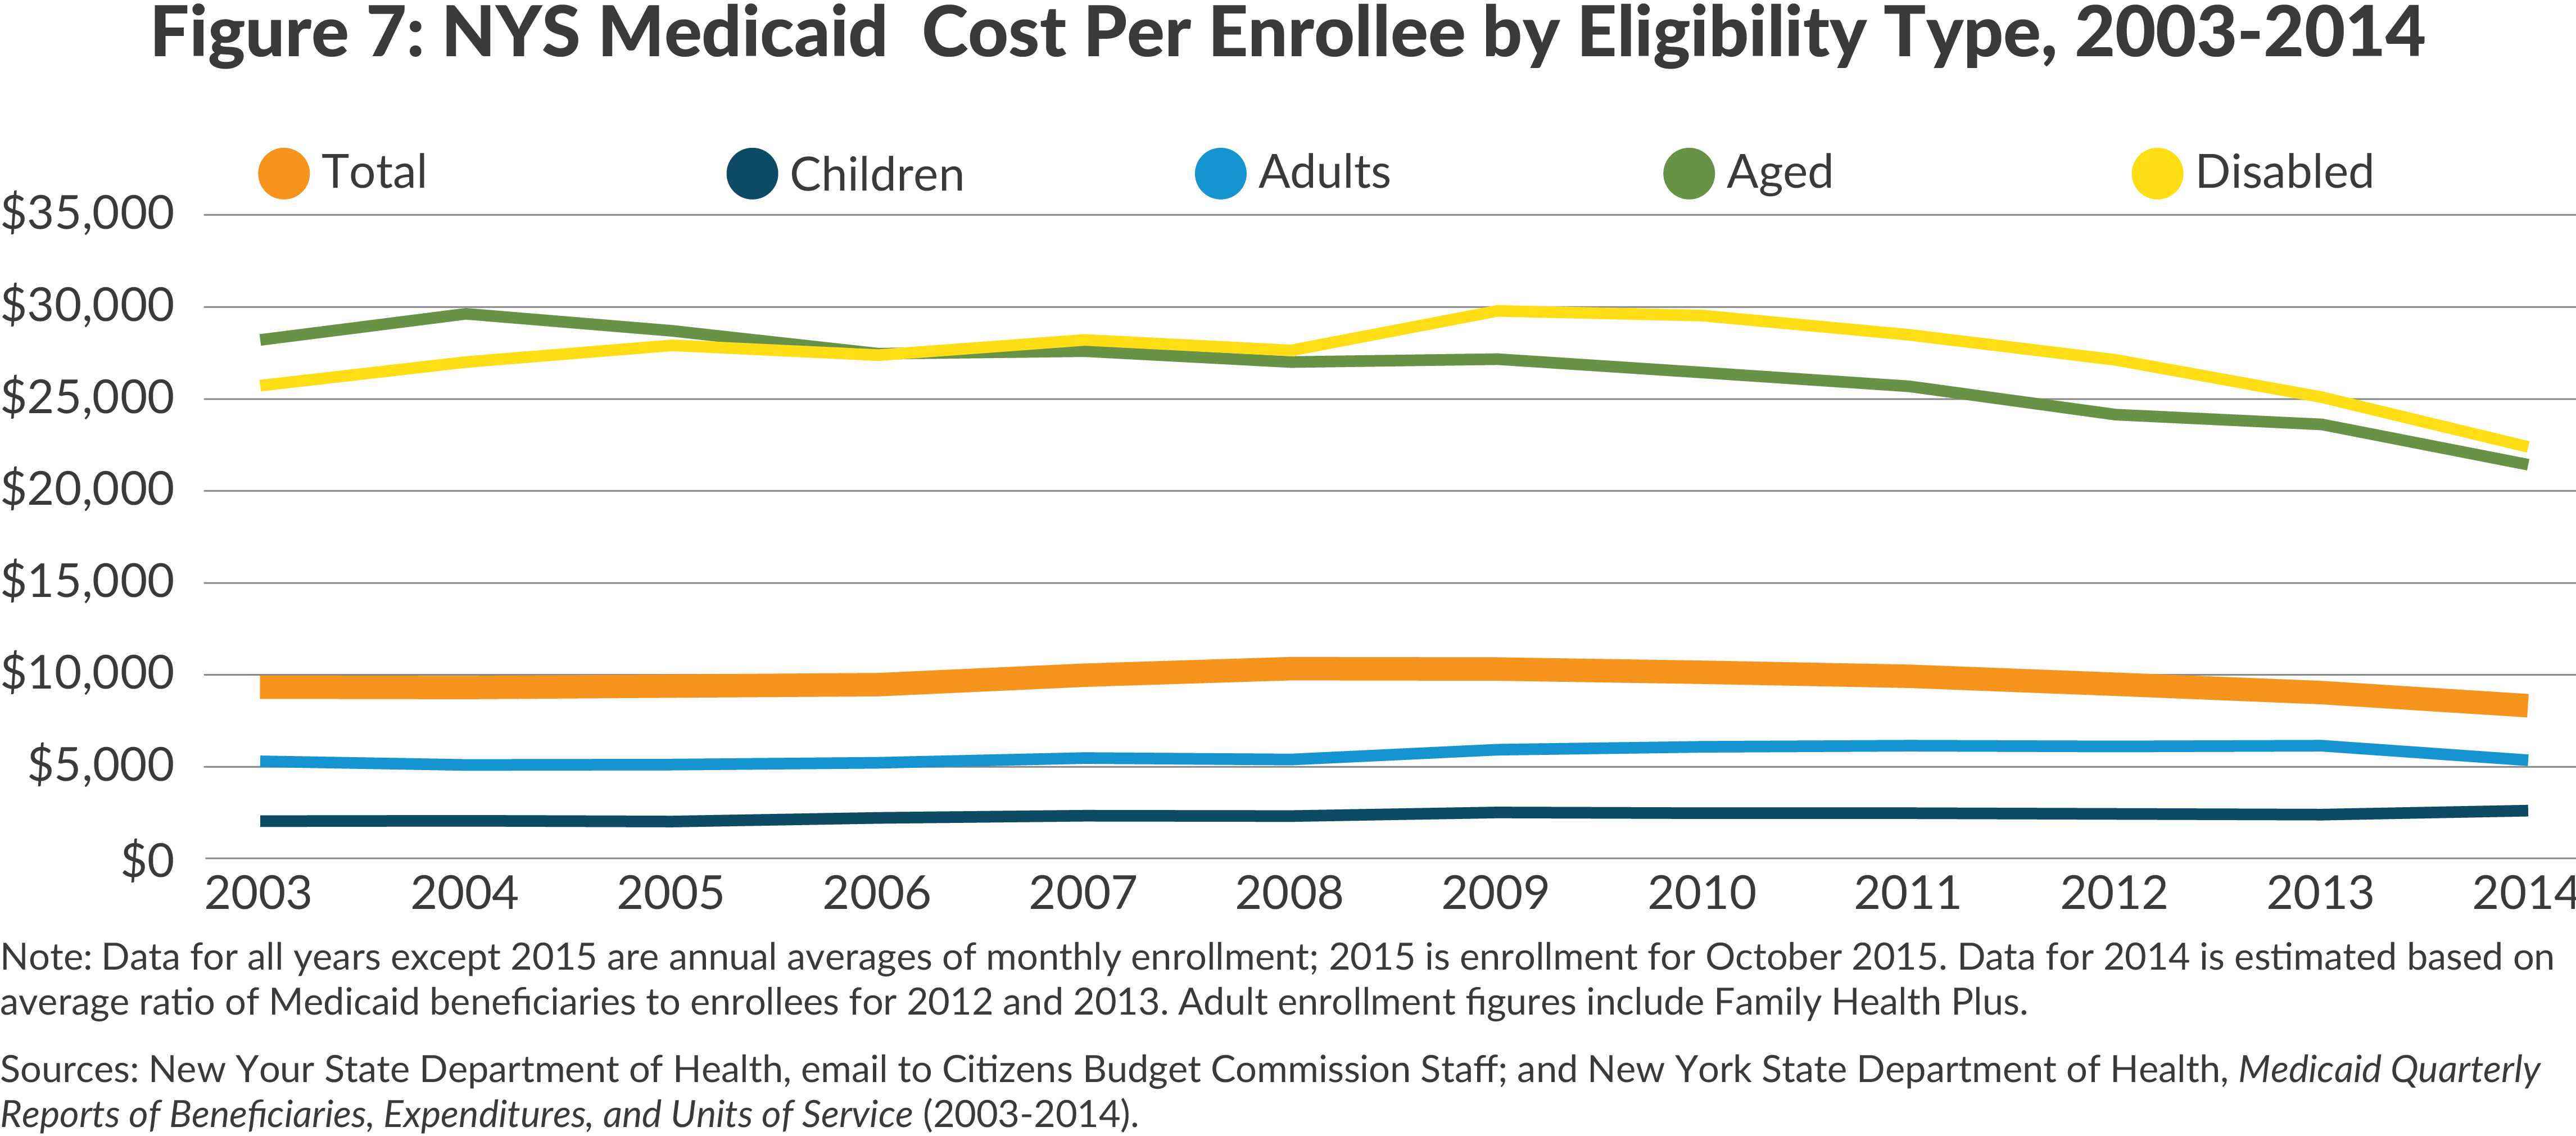 NYS Medicaid costs by enrollee type, 2003-2014